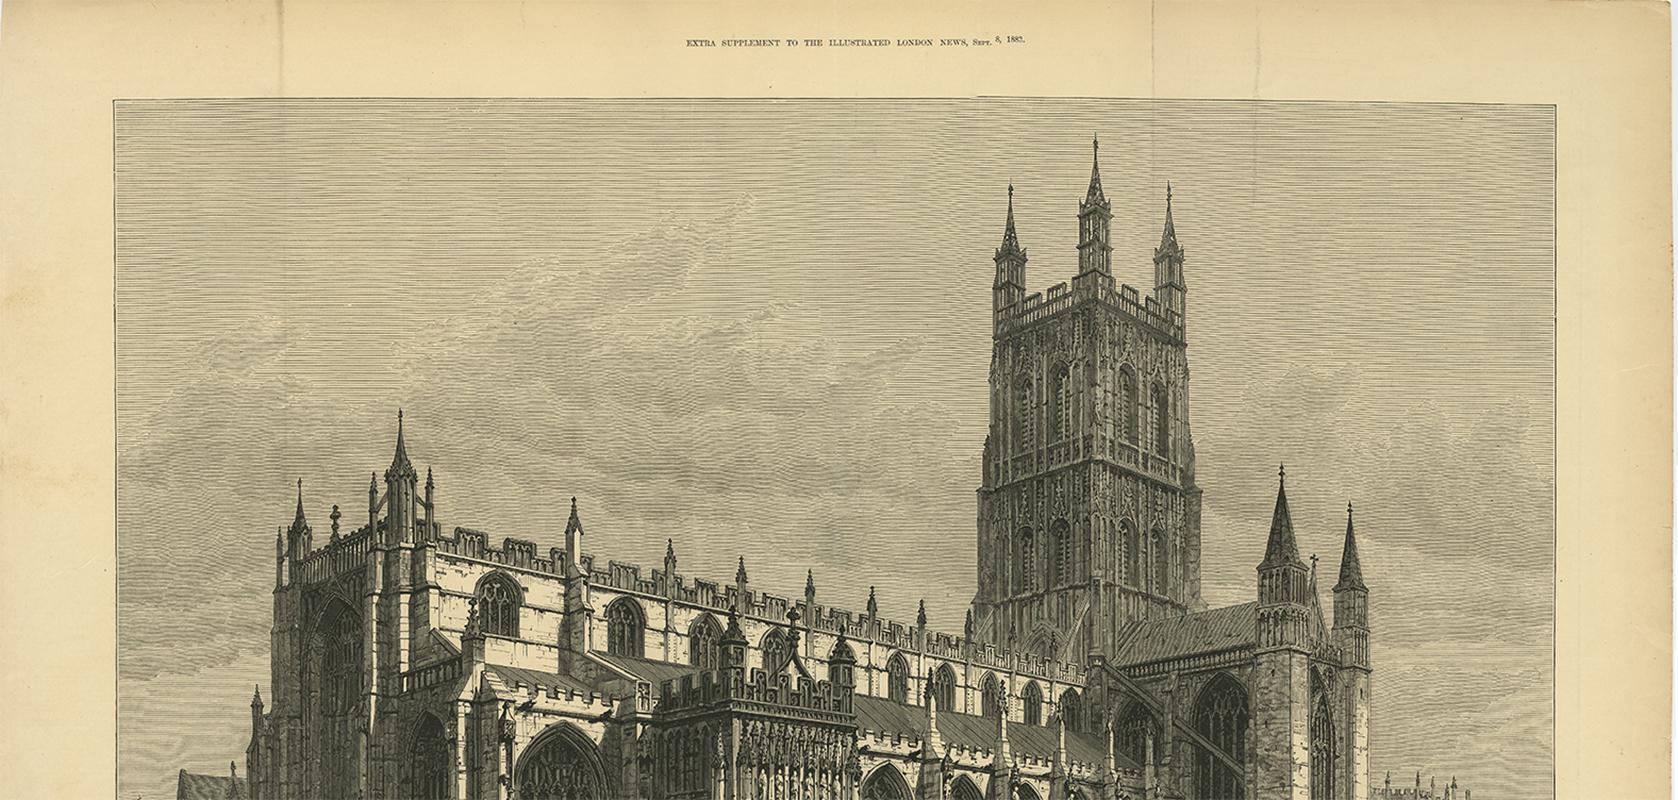 19th Century Antique Print of Gloucester Cathedral from the Illustrated London News, 1883